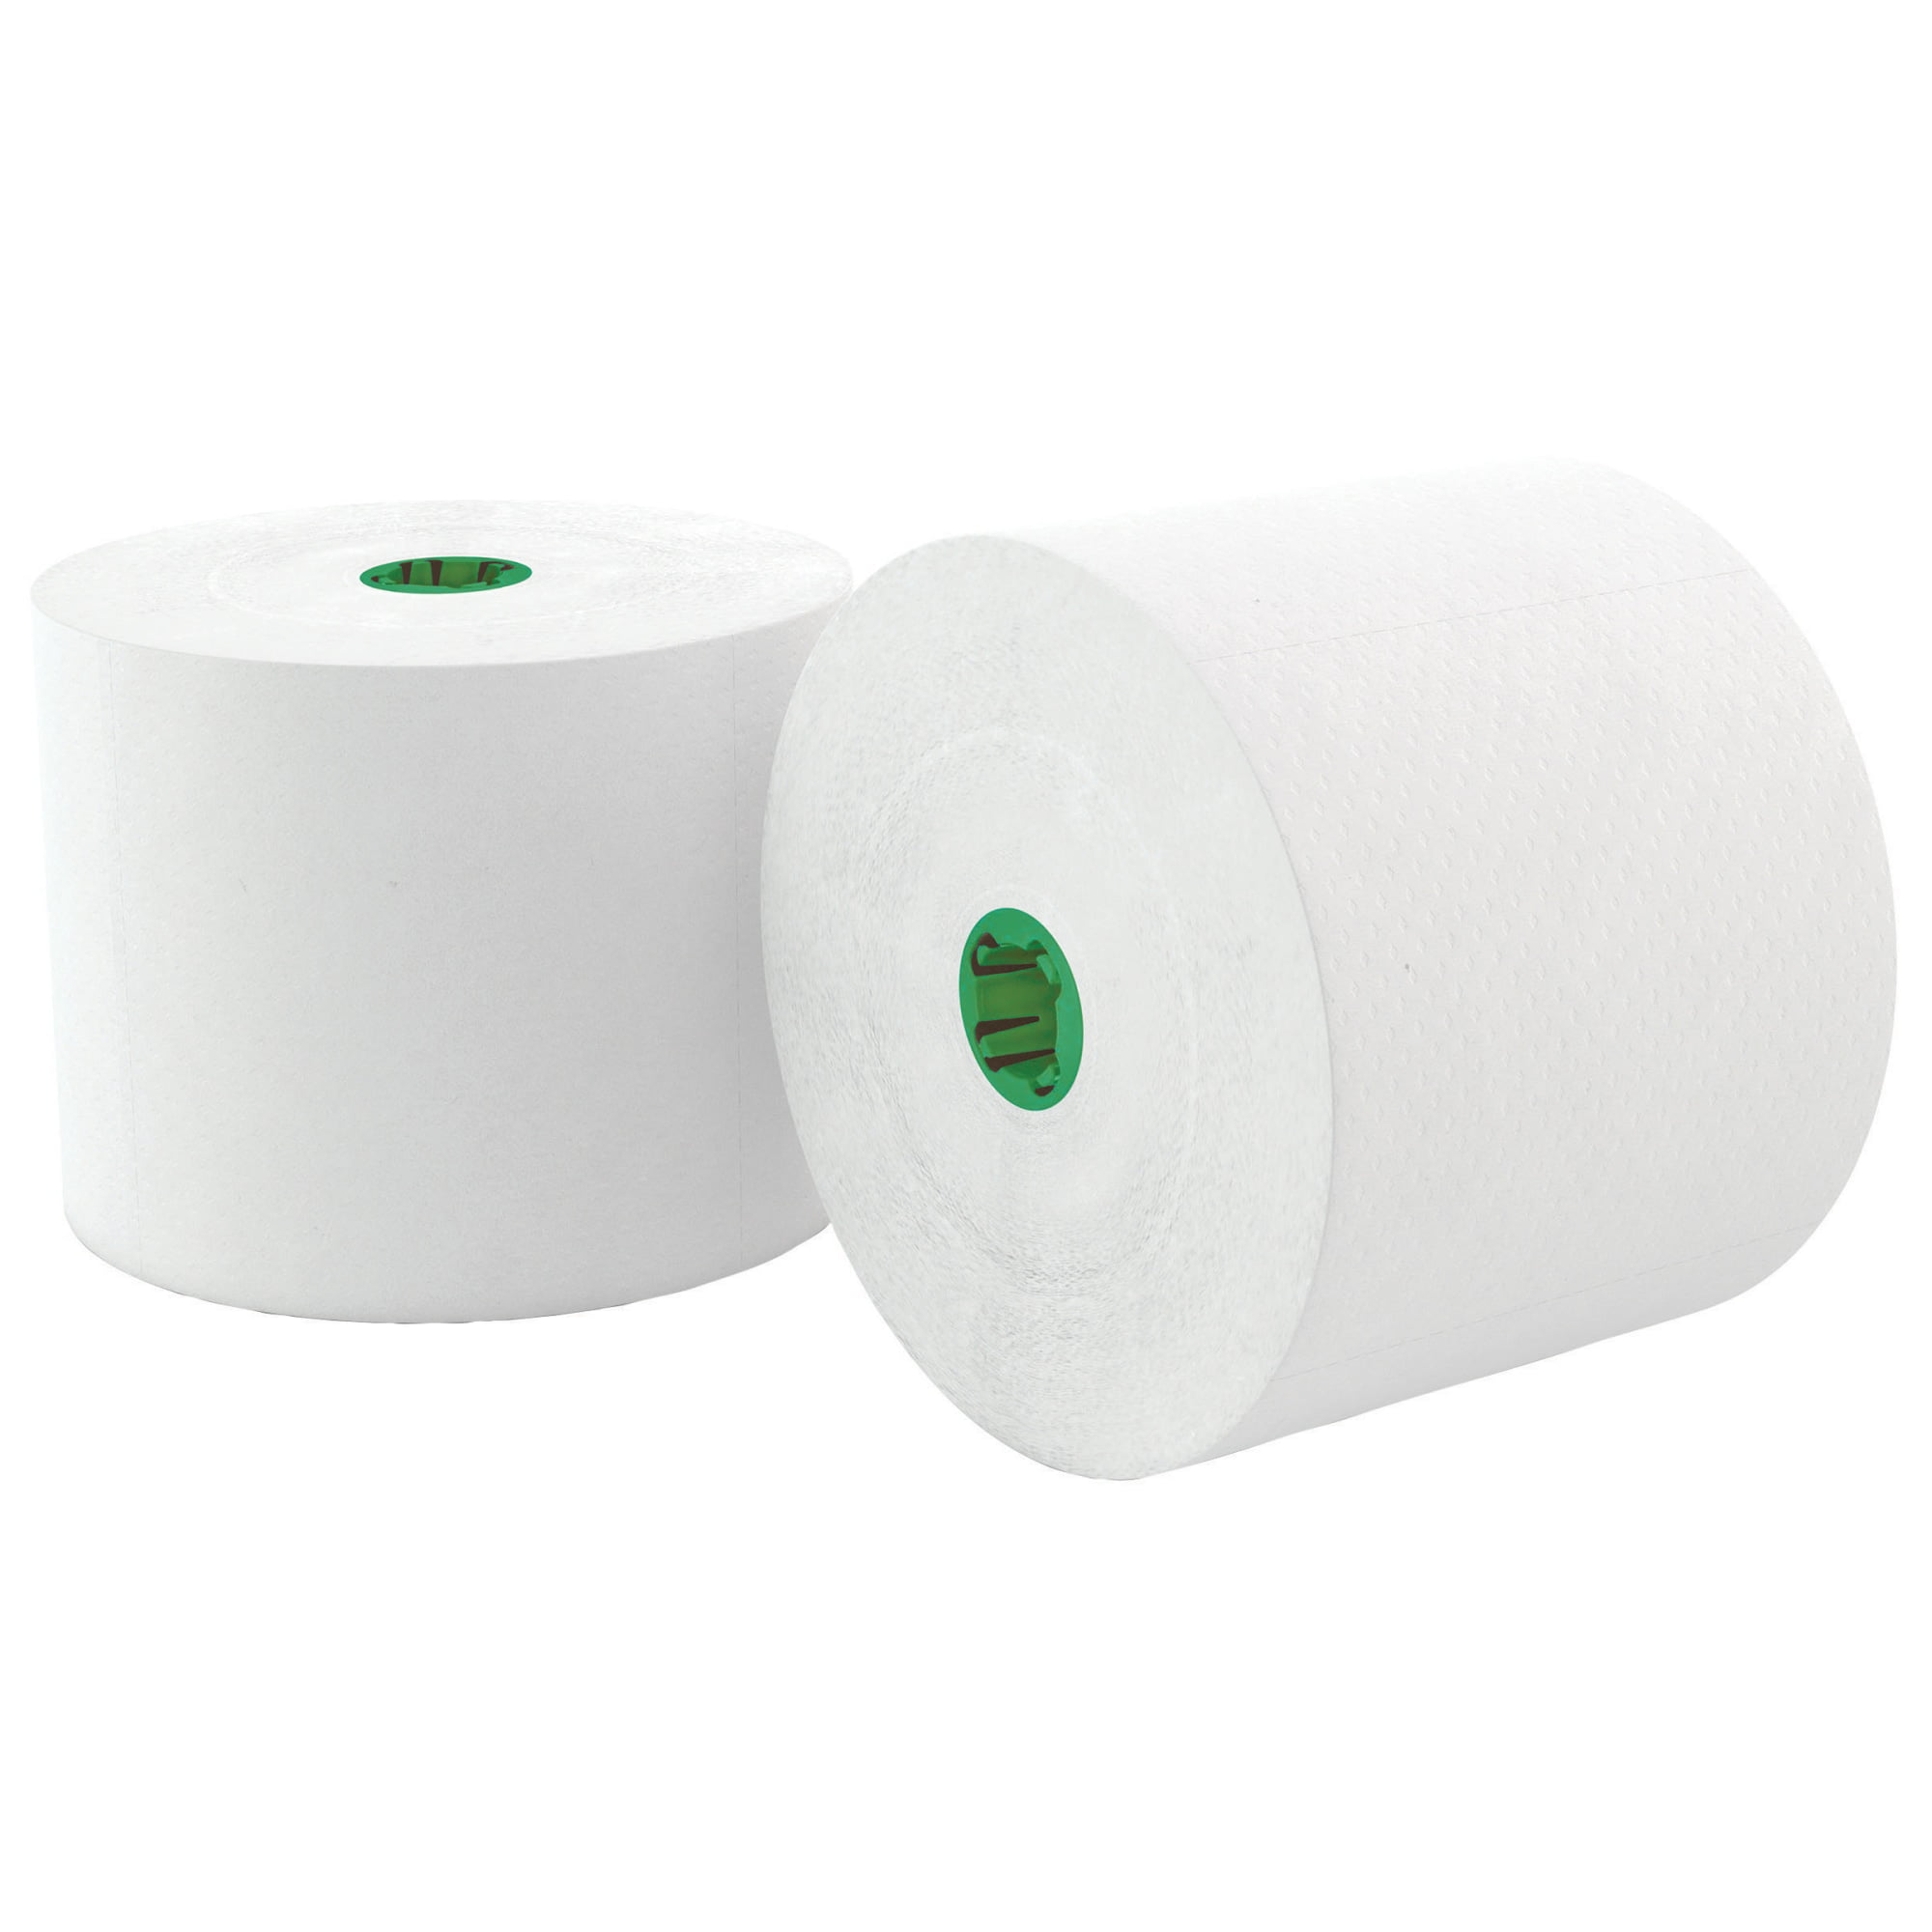 Highmark toilet paper subscriber availity trace